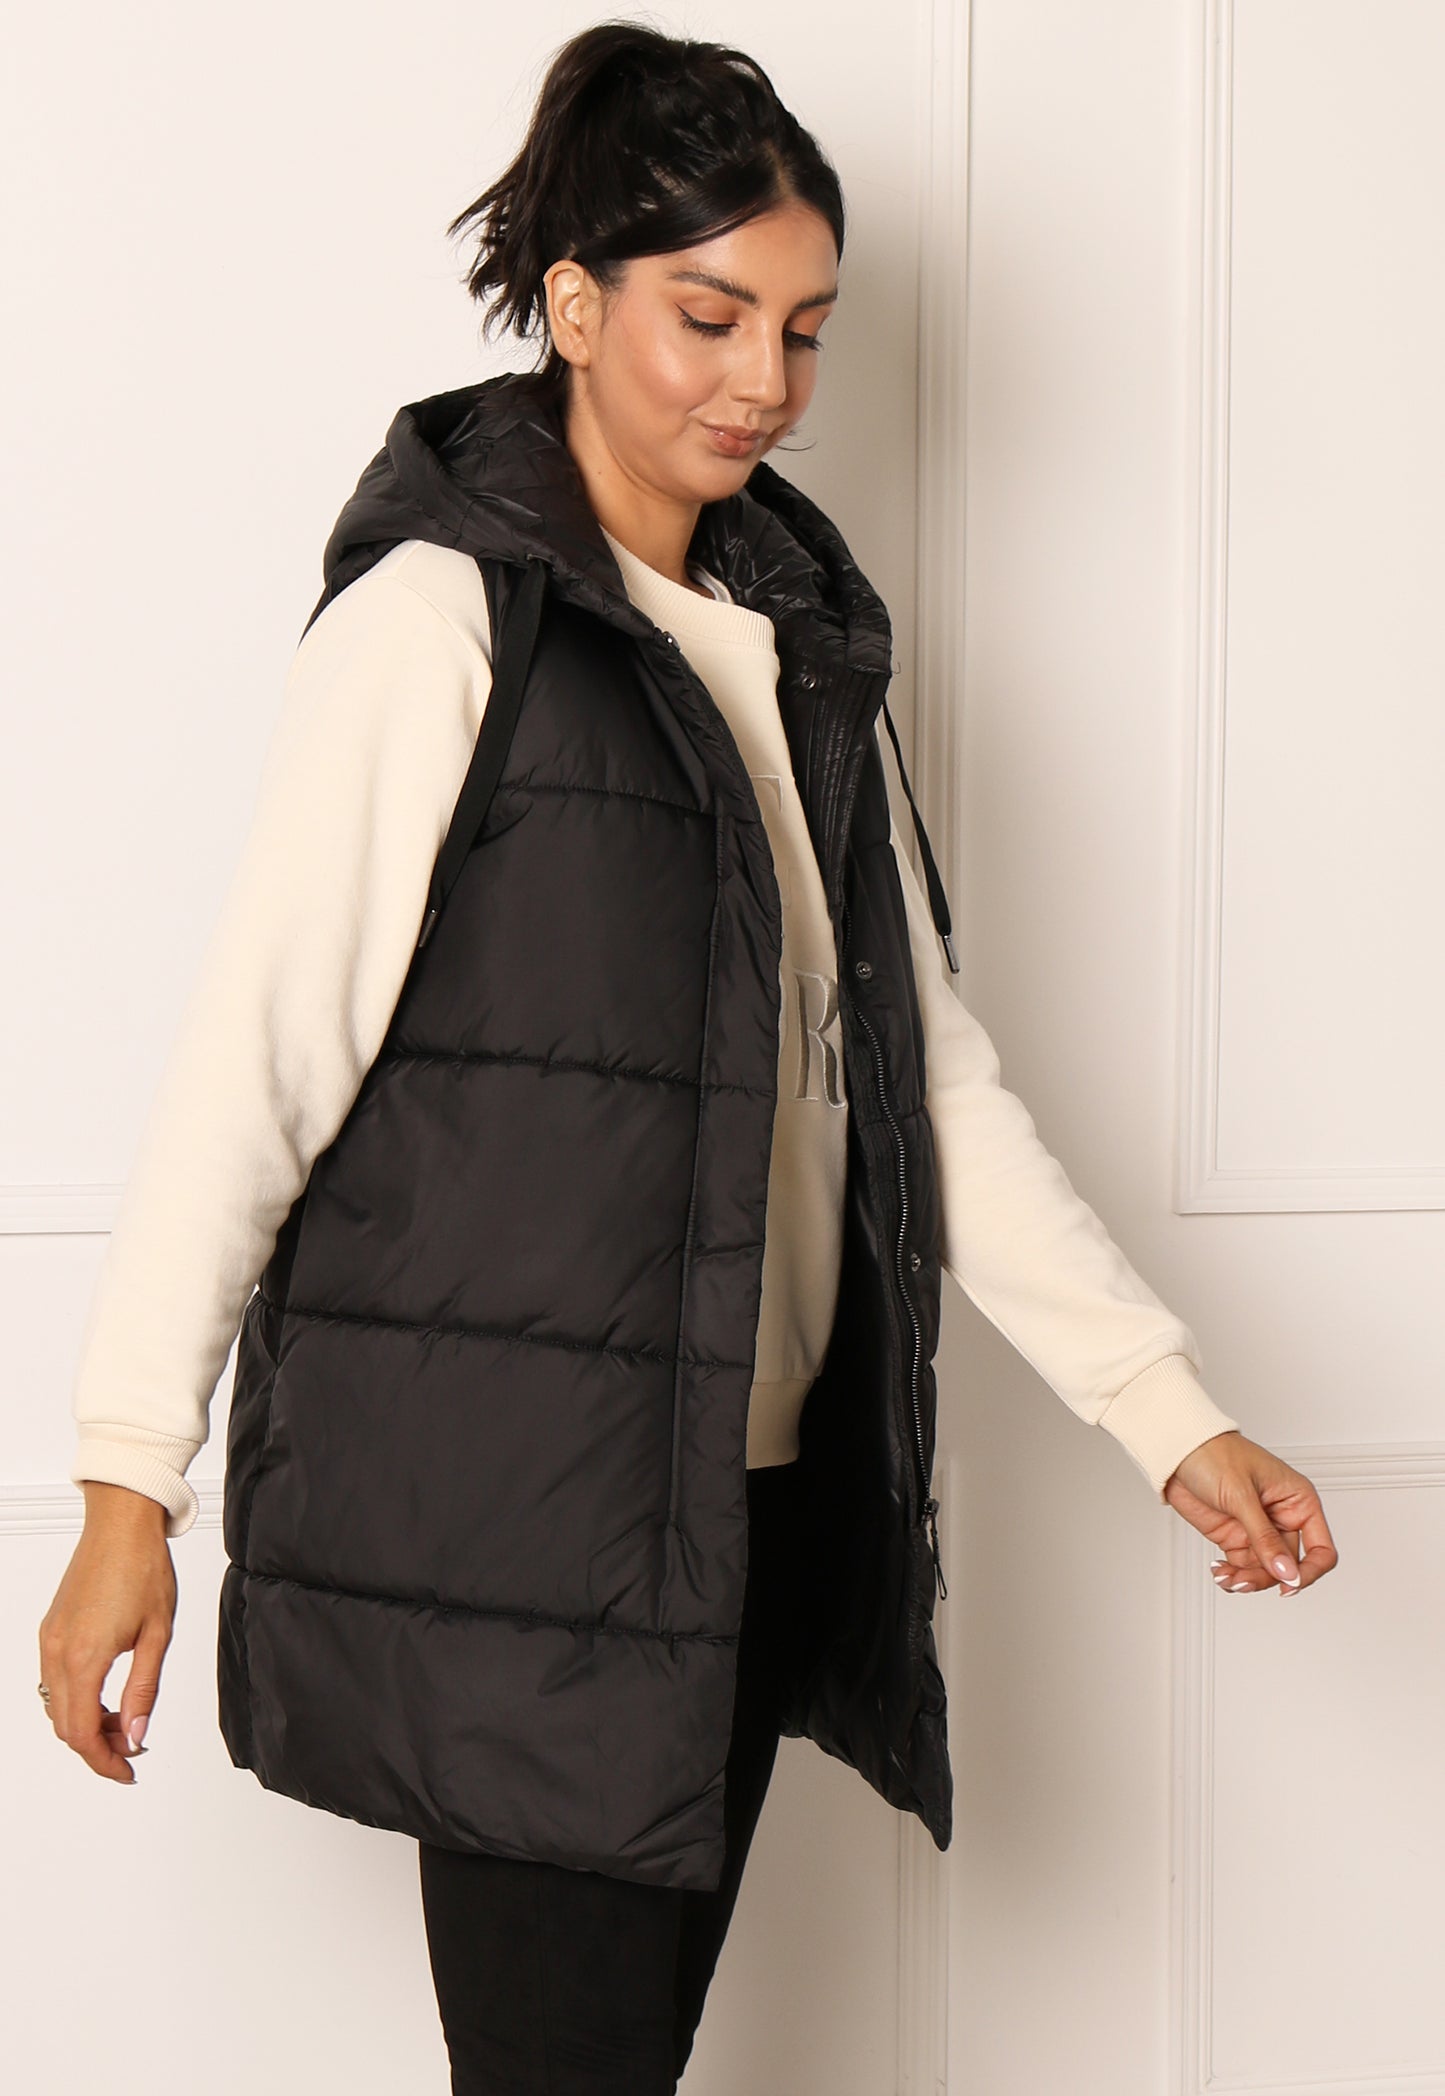 ONLY Asta Longline Sleeveless Puffer Gilet with Hood in Black - concretebartops